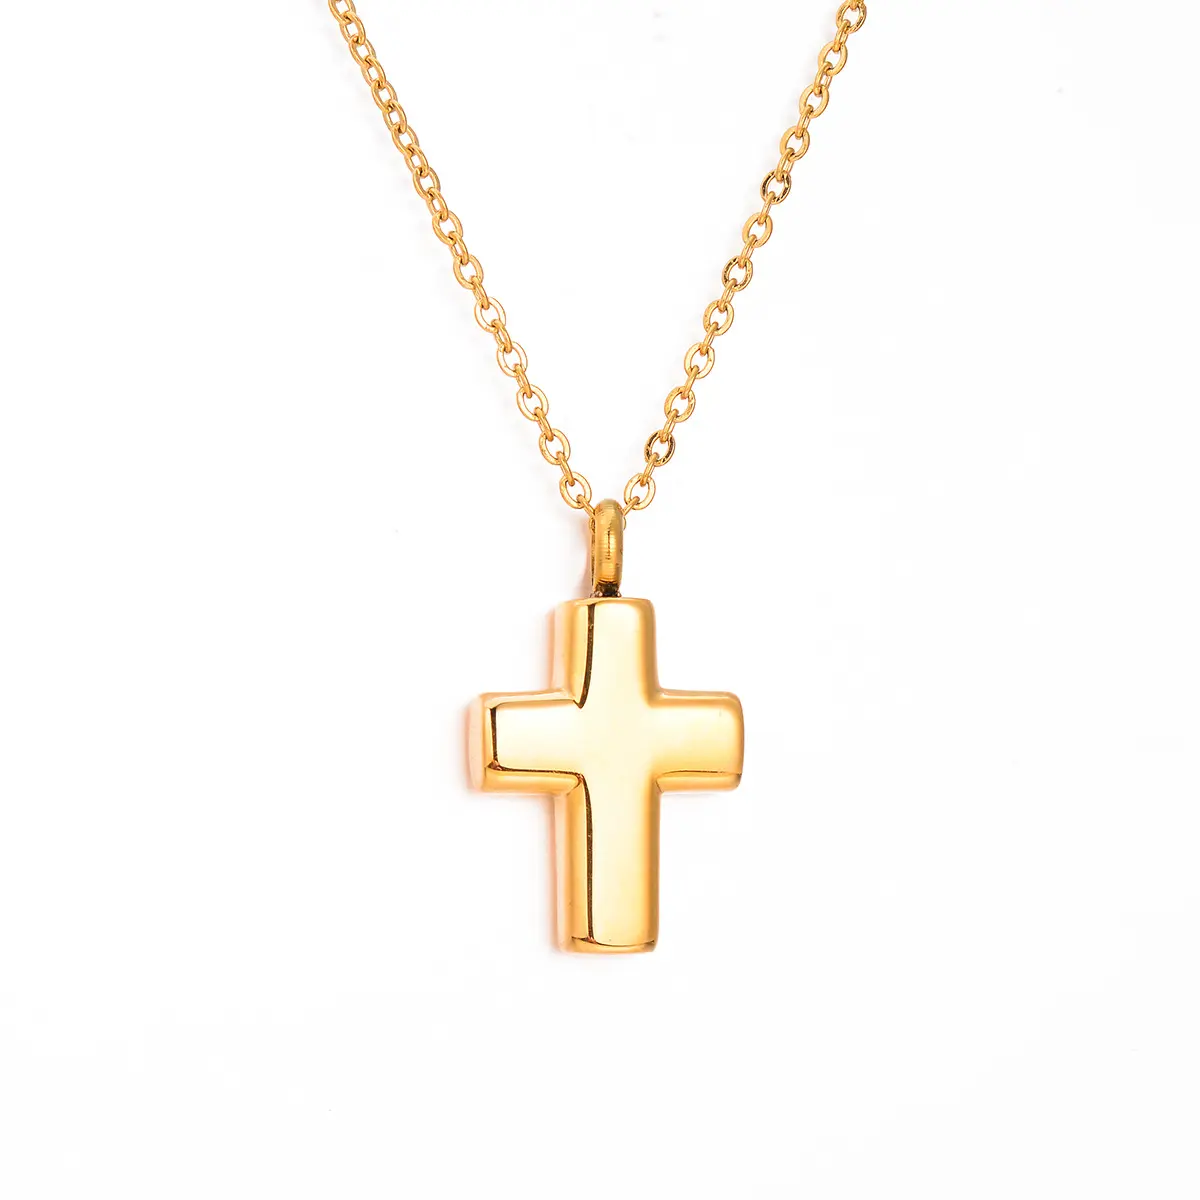 Wholesale Custom Bulk Stainless Steel Christian Jewelry Religious Small Cross Pendant Necklace 18K Gold Plated Women Jewelry